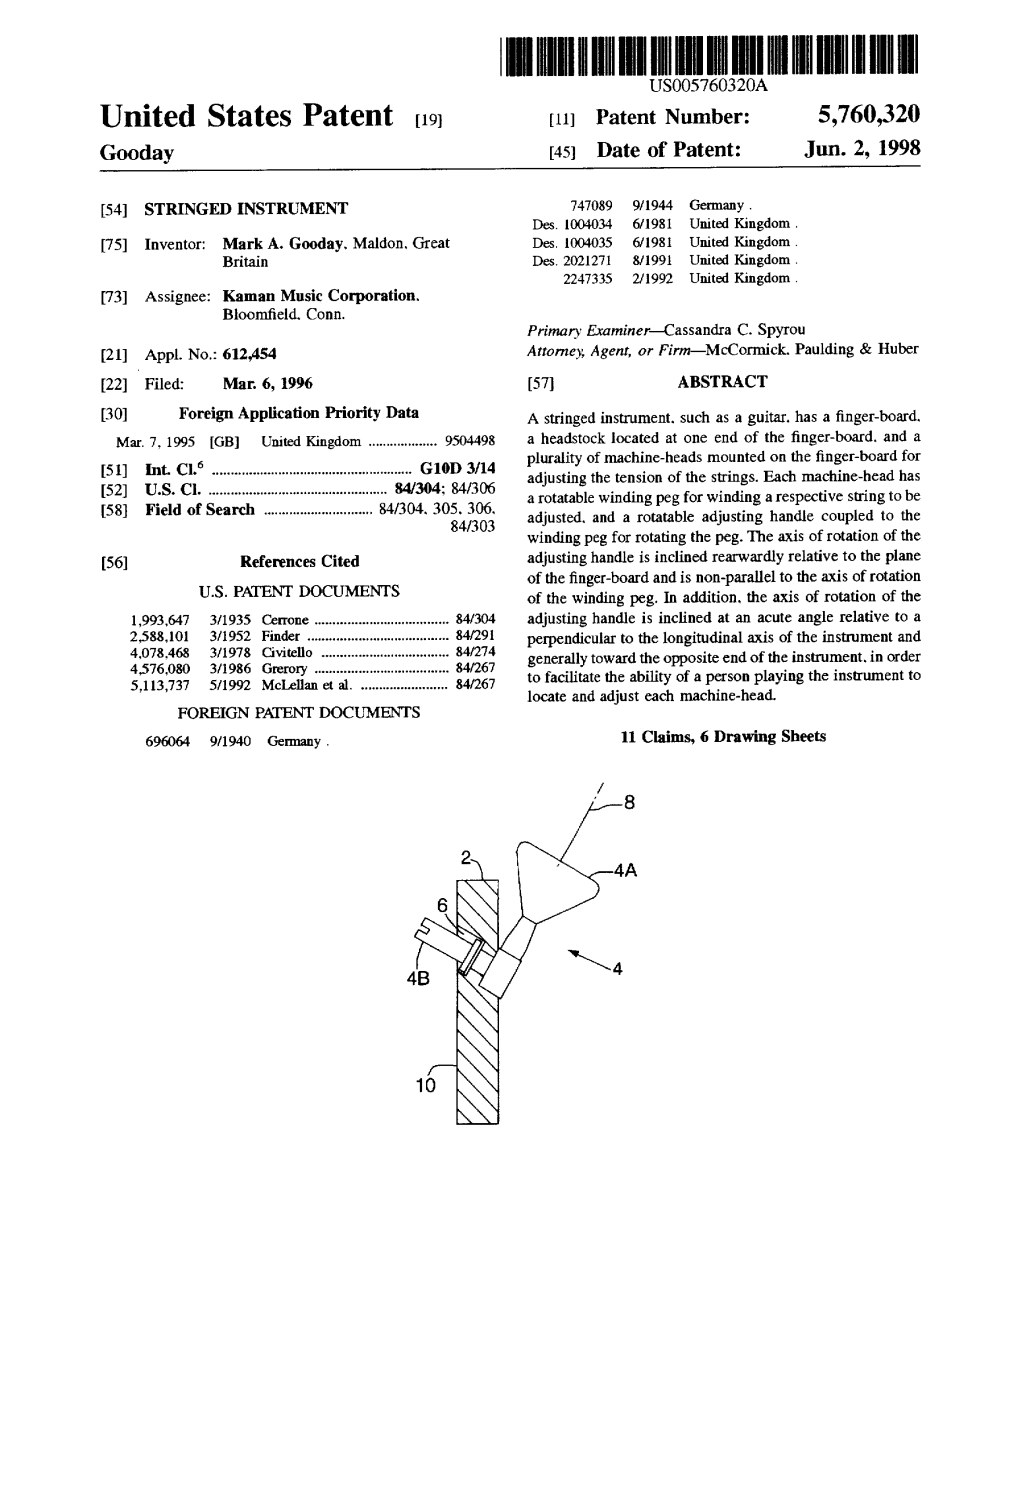 United States Patent (19) 11 Patent Number: 5,760,320 Gooday 45) Date of Patent: Jun